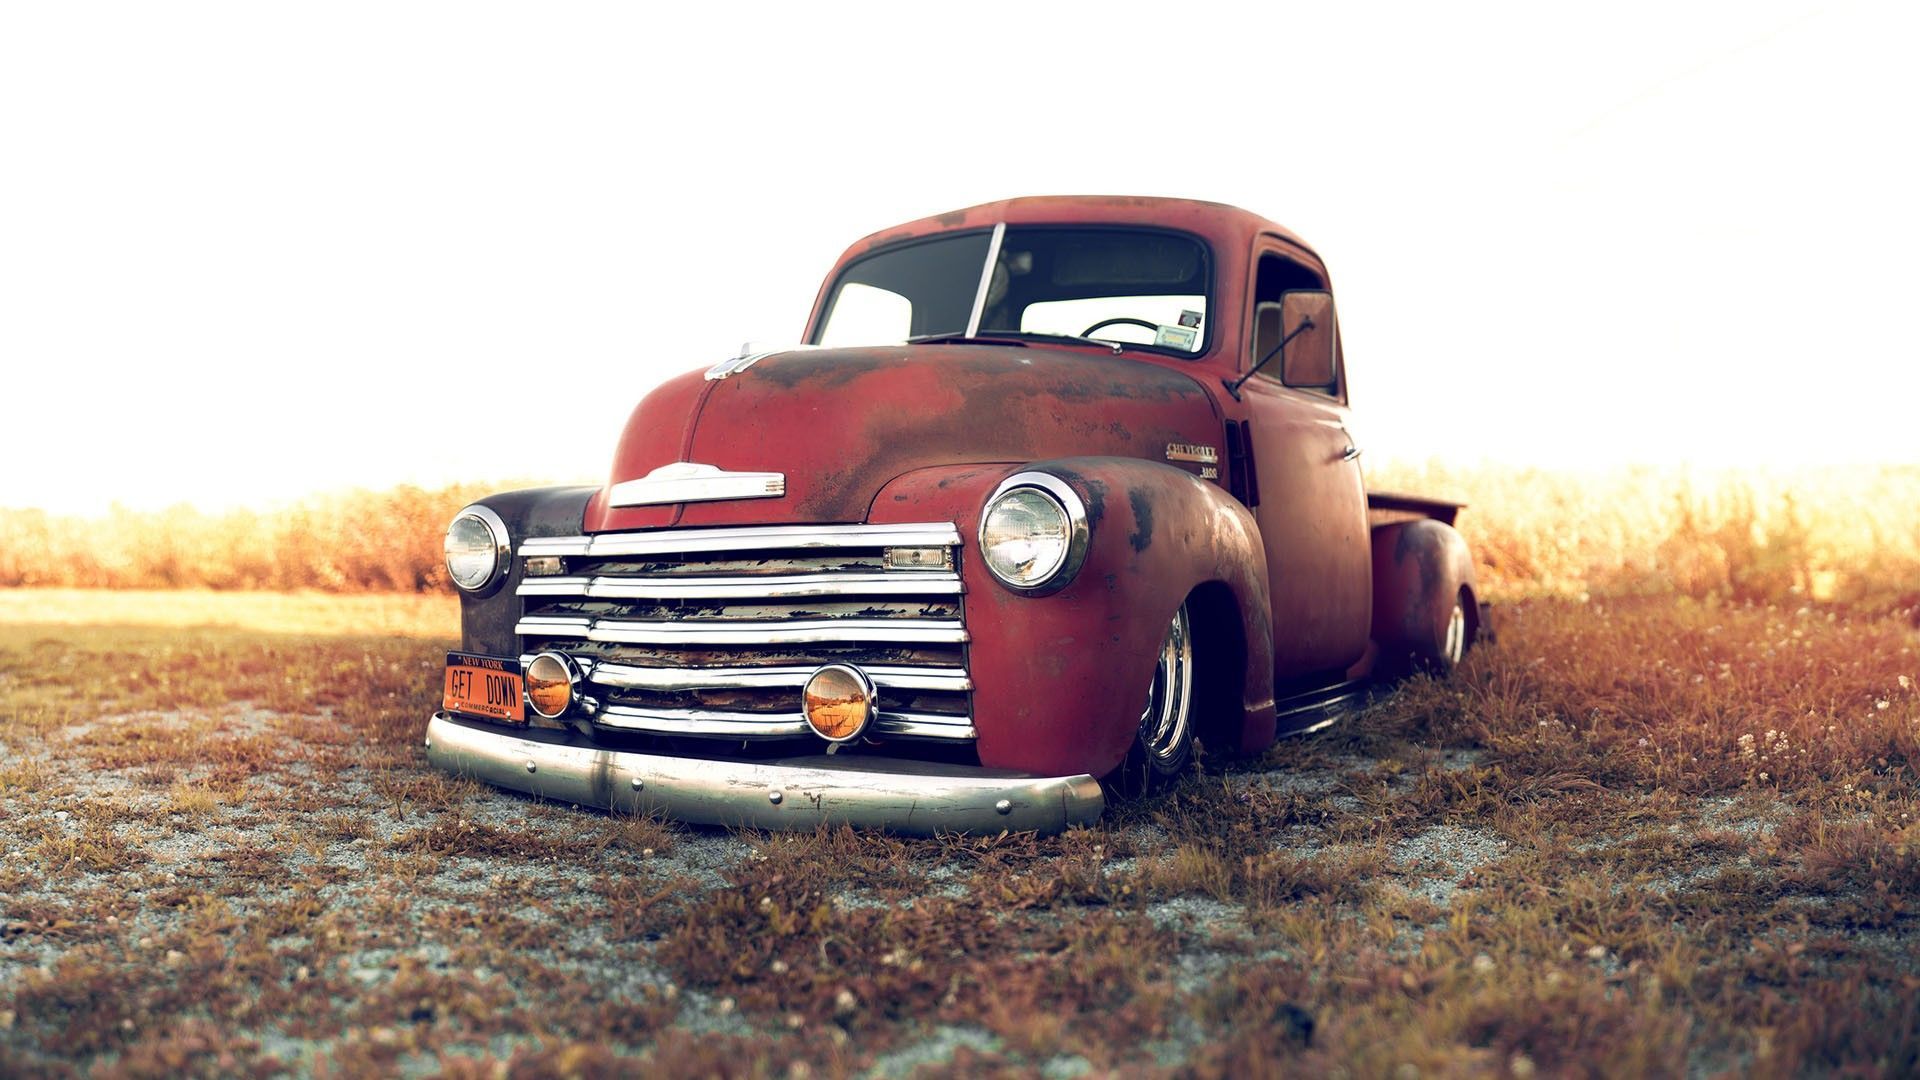 Classic Chevy Truck Wallpapers   Top Free Classic Chevy Truck